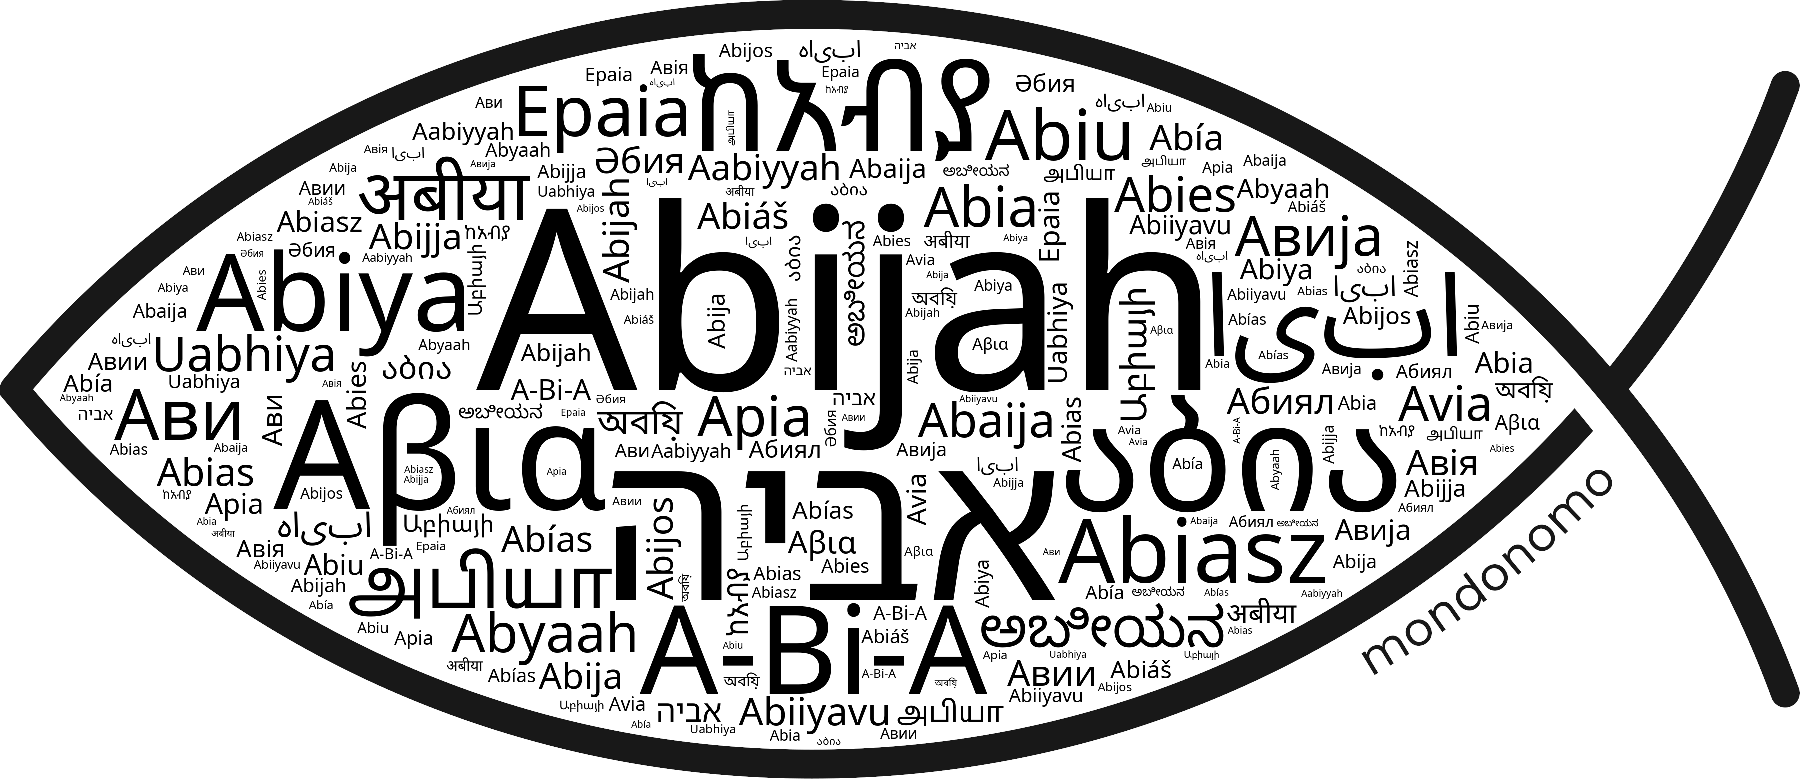 Name Abijah in the world's Bibles